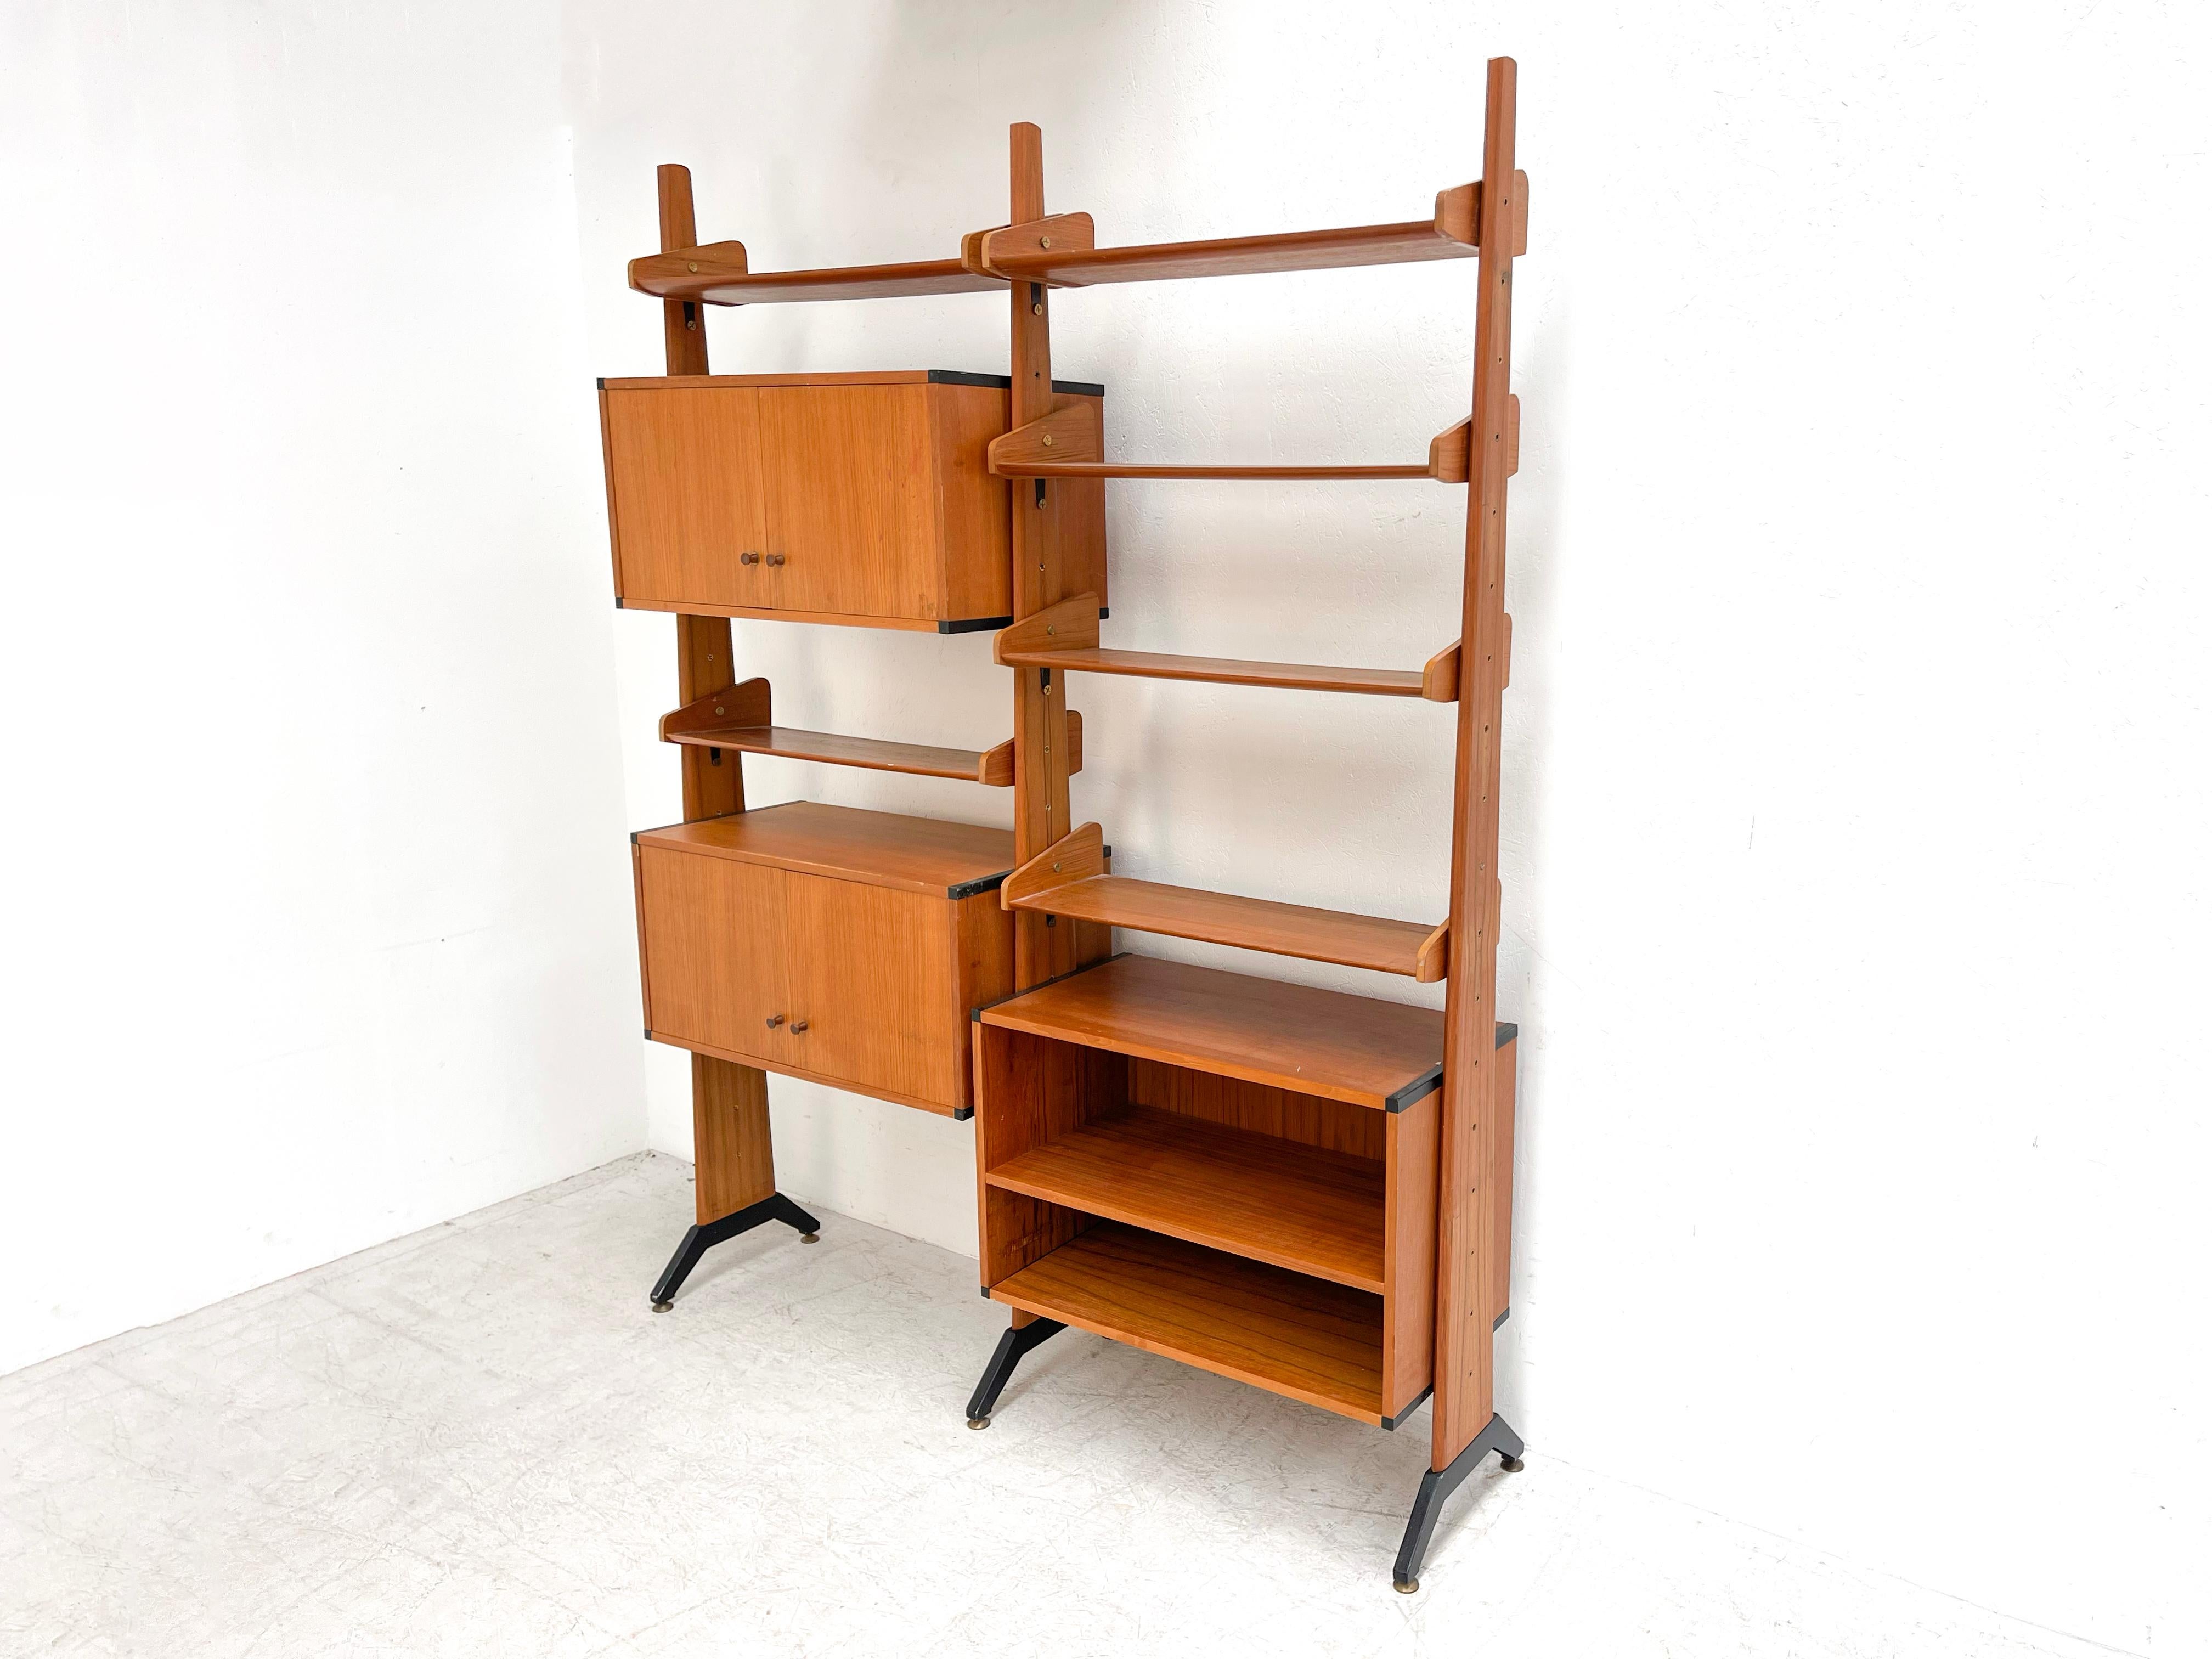 Italian freestanding wall unit
Italian wall unit made in the 1970's in Italy. It is a true statement piece that shows the quality and craftmanship of Italian design.
These quality pieces are becoming rarer and rarer.
 
This is a free standing